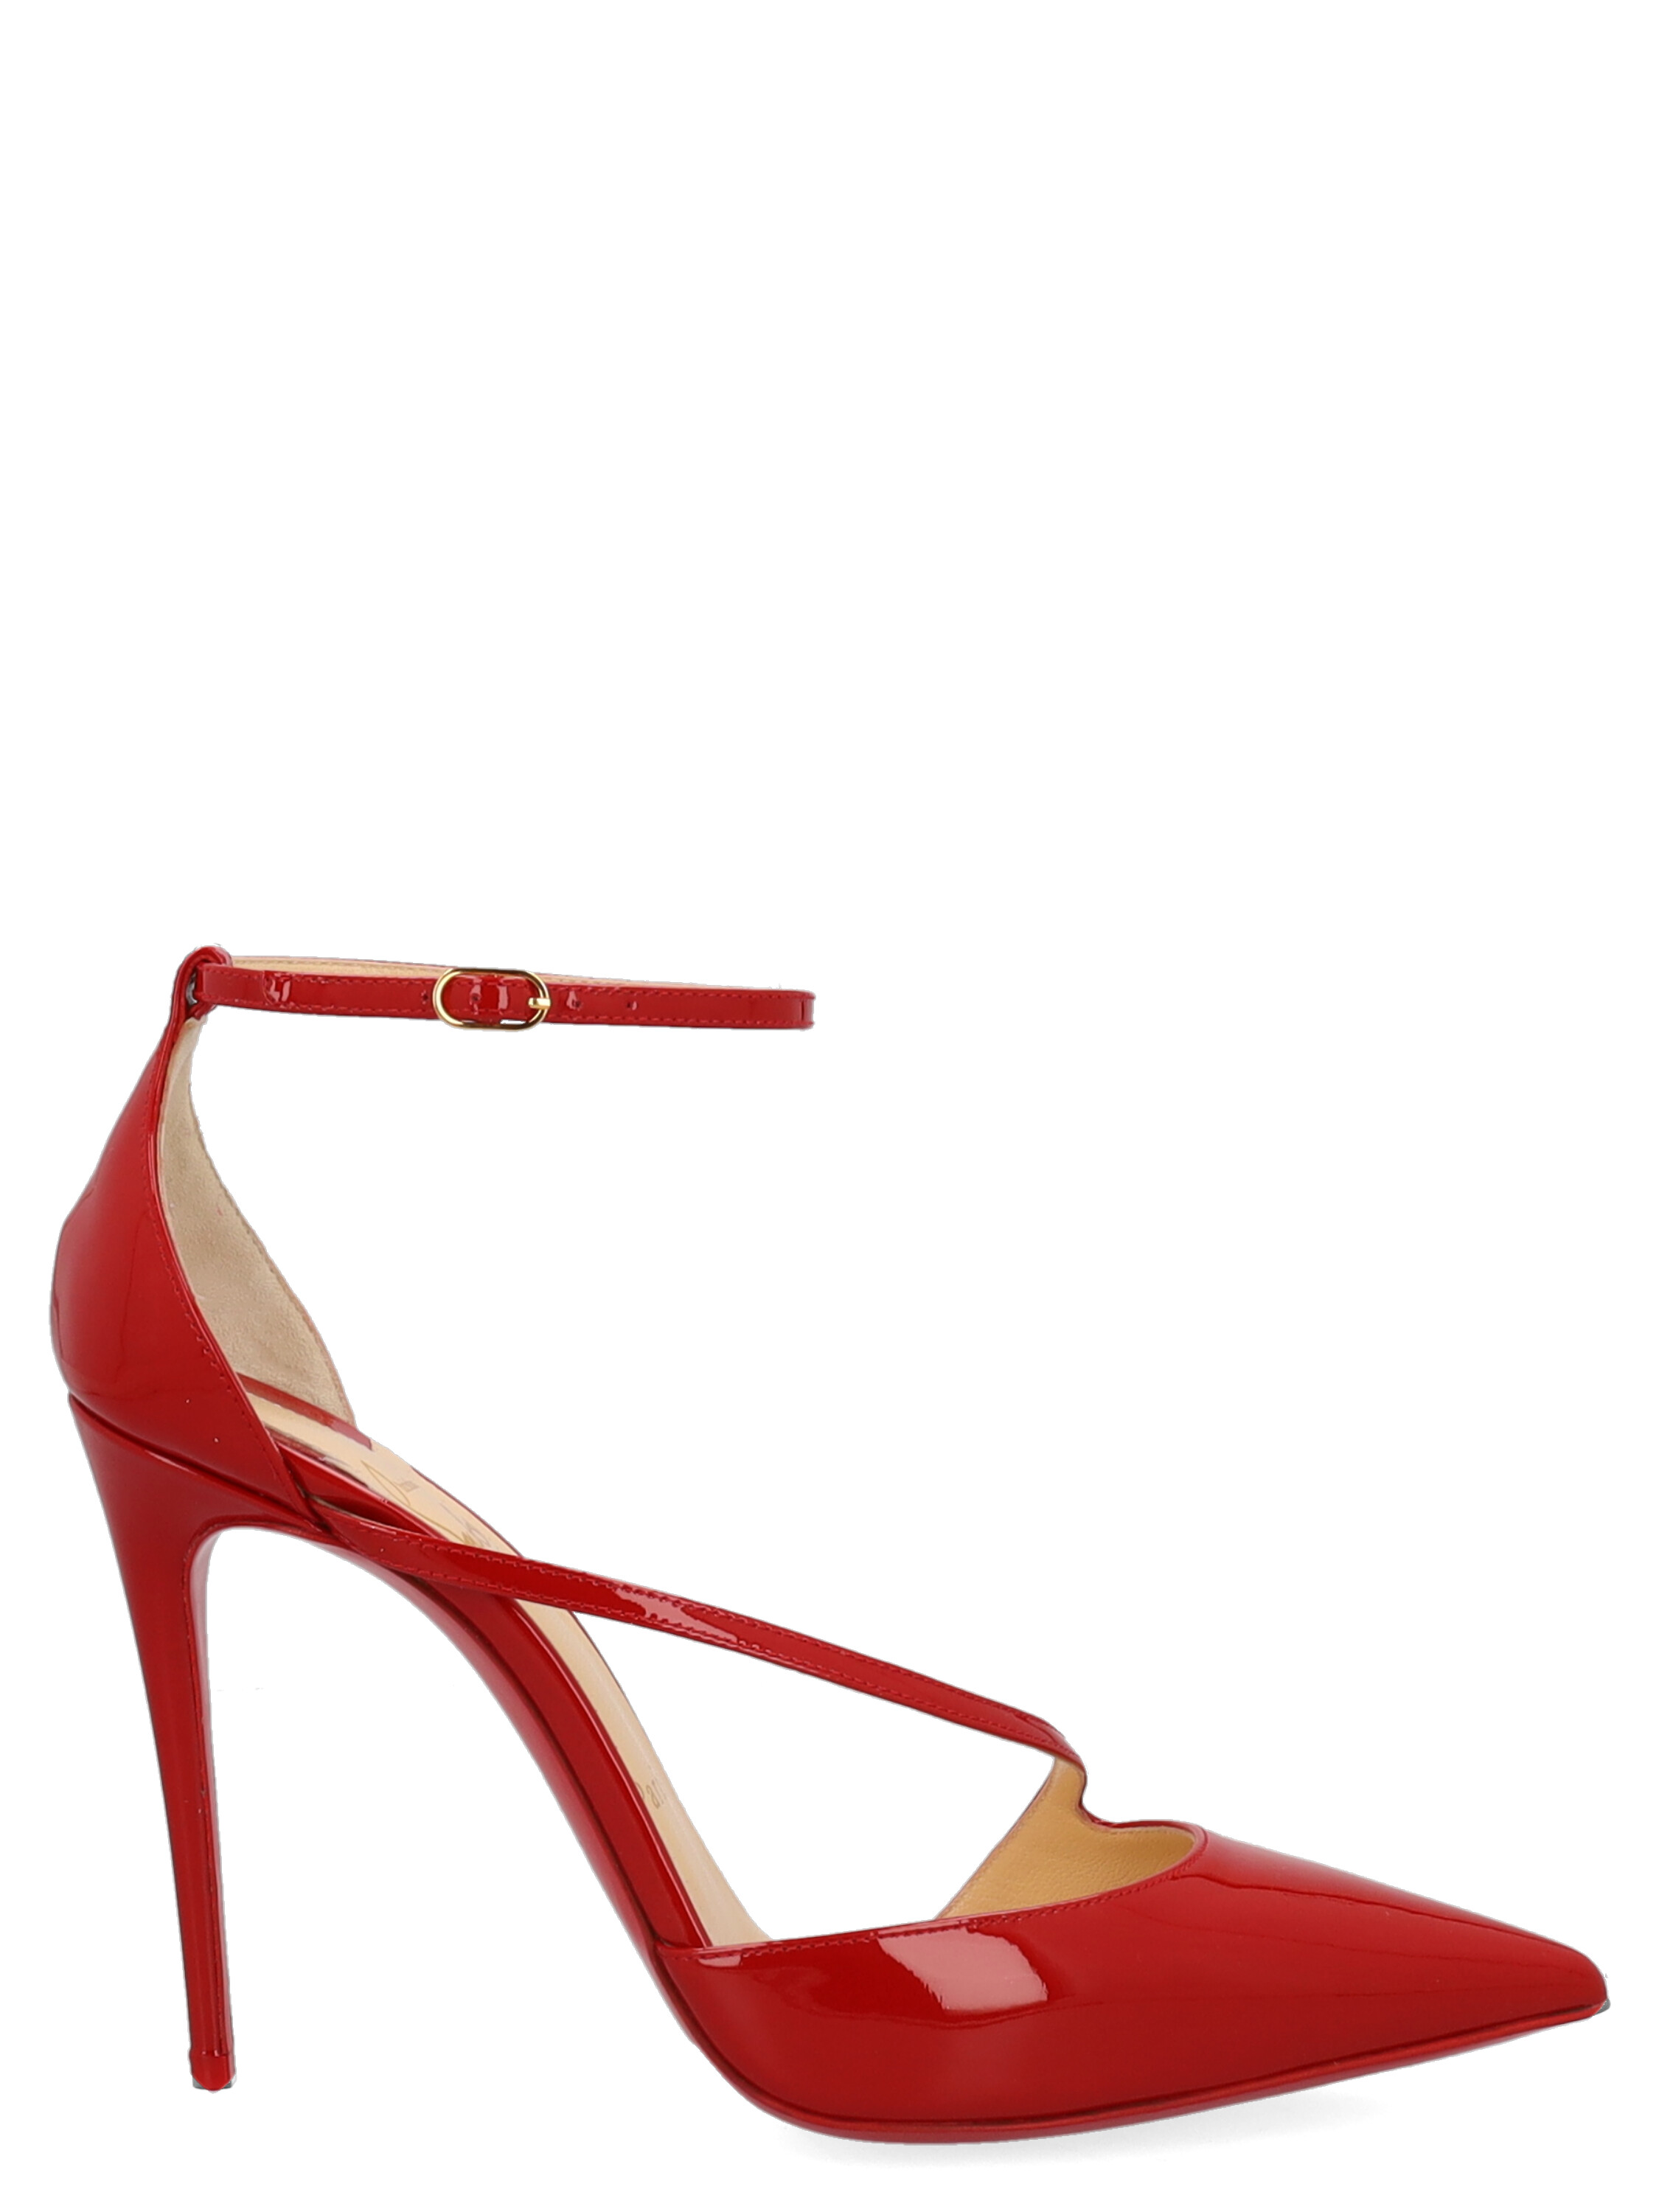 Pre-owned Christian Louboutin Women's Pumps -  - In Red It 37.5